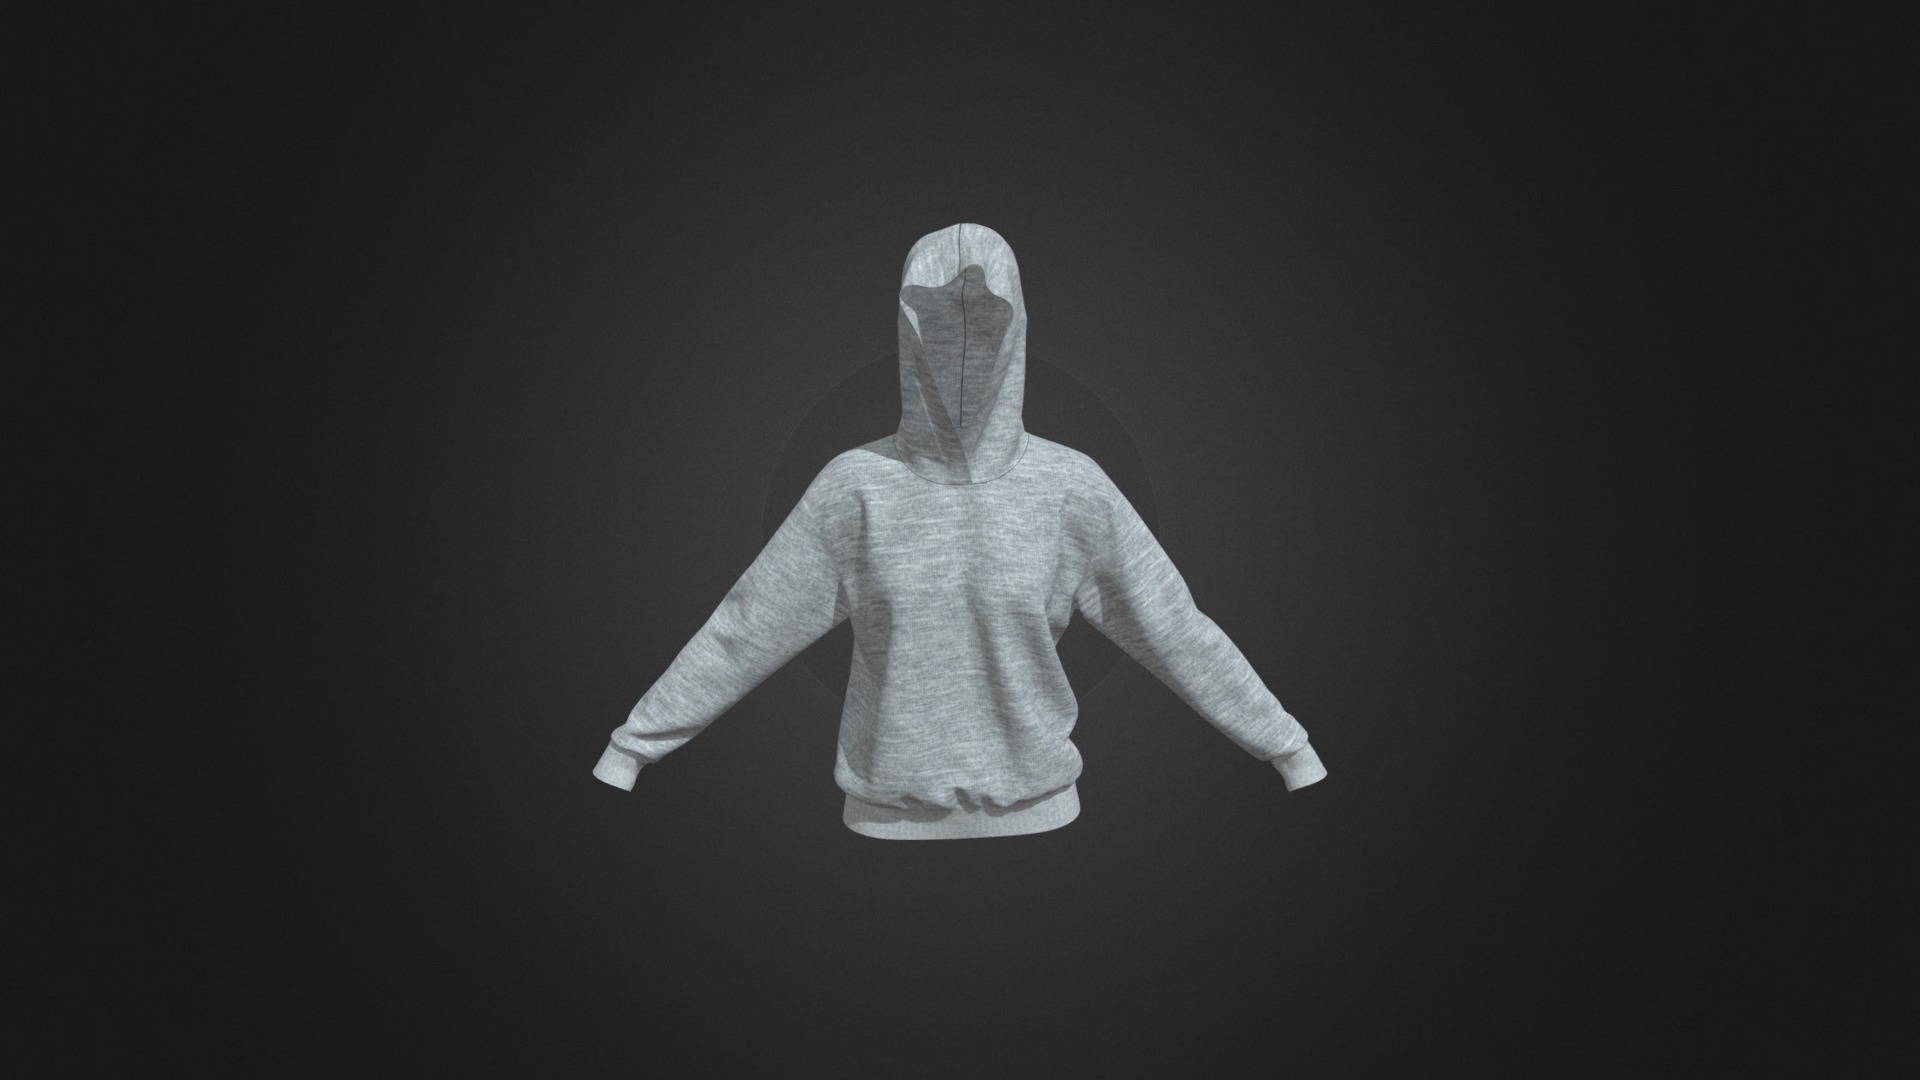 3D model Women’s Hooded Gray (Melange) - This is a 3D model of the Women's Hooded Gray (Melange). The 3D model is about a white statue of a person.